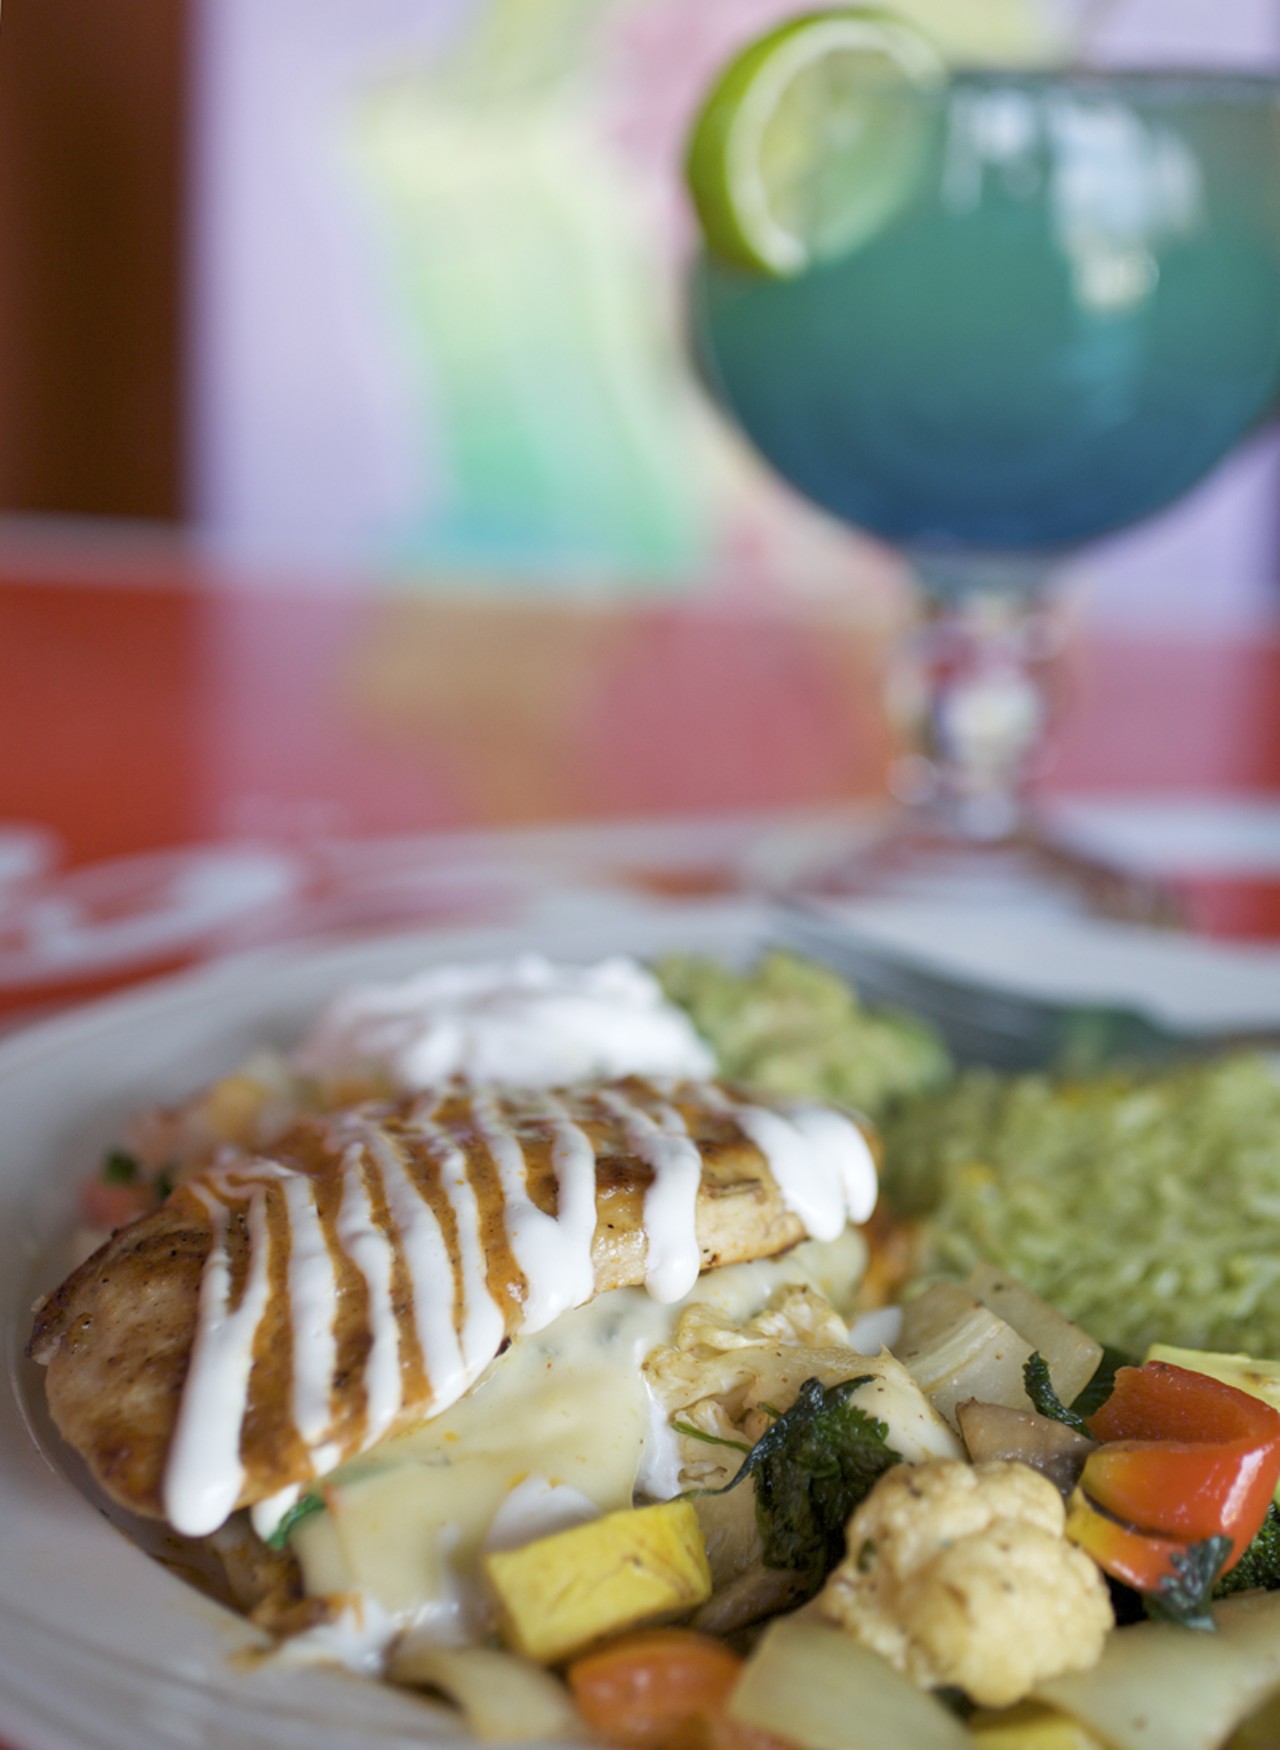 The Las Palmas stuffed chicken is chicken stuffed with spinach, mushrooms, onions, pepperjack cheese and in a spicy diablo sauce. It is served with cilantro rice, veggies, guacamole, sour cream and pico de gallo.